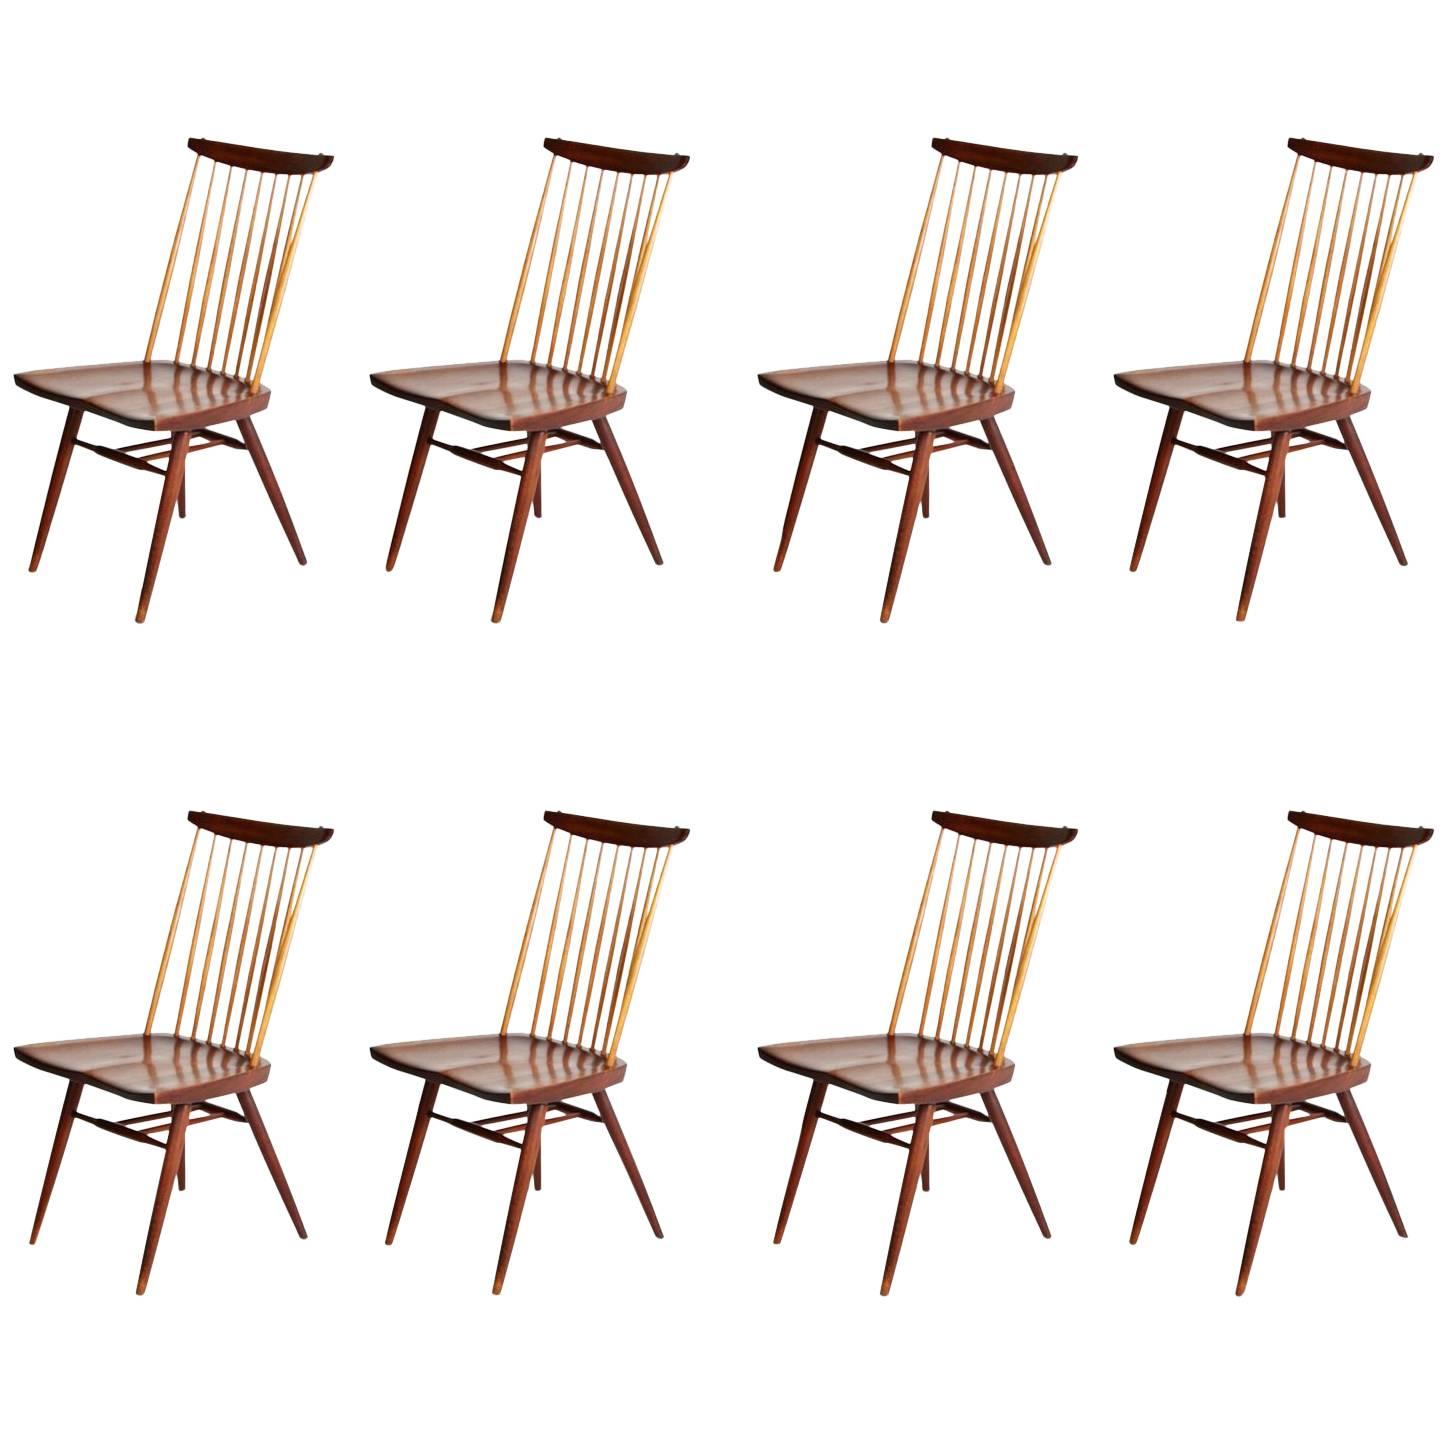 George Nakashima "New" Chairs, Set of Eight, Authenticated 1960s Production